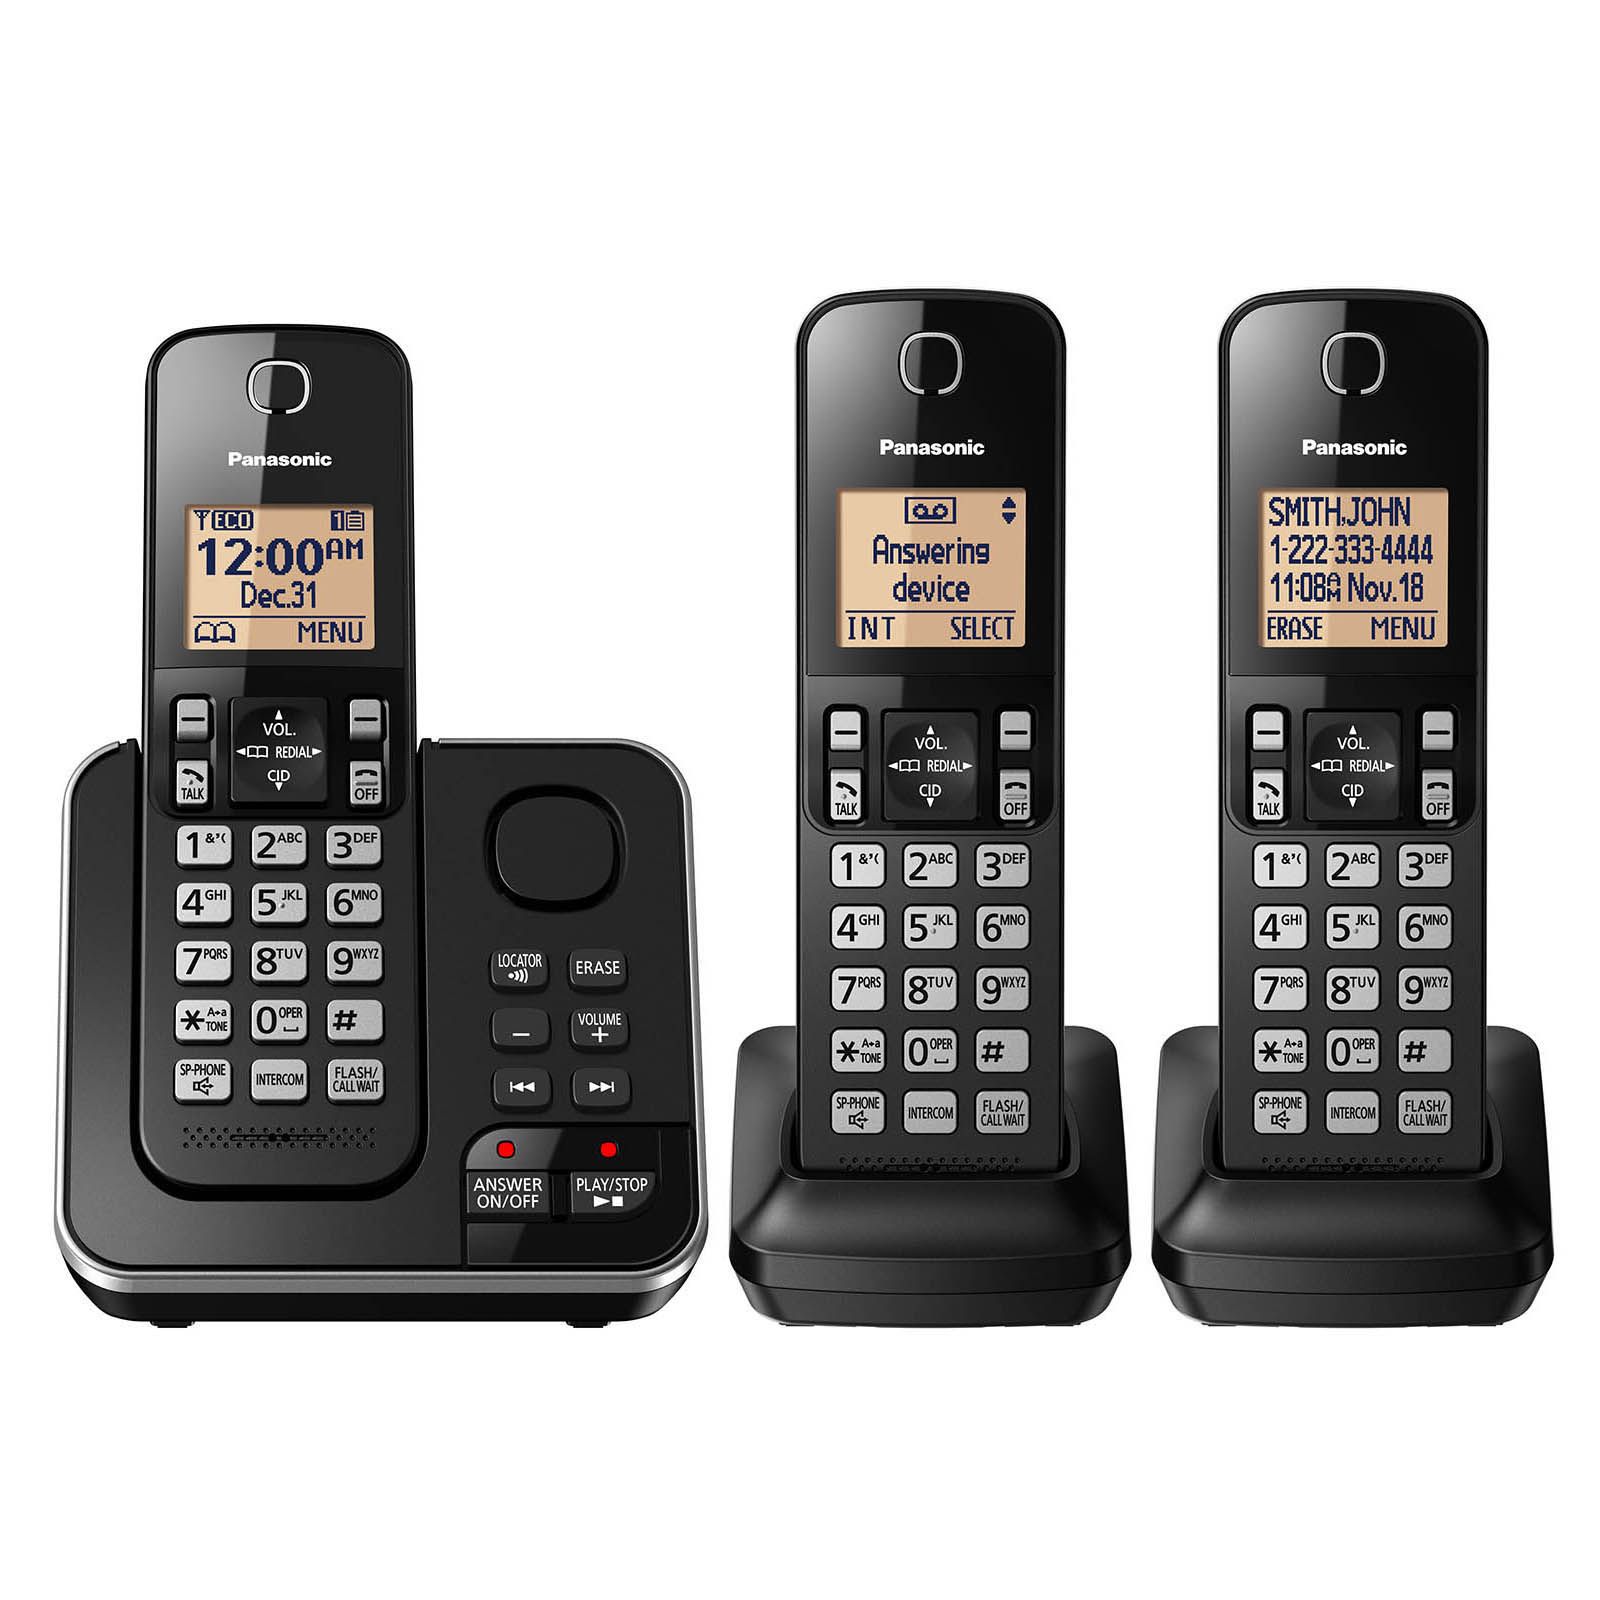 Panasonic cordless phone DECT 6.0 PLUS 3-with Answering System